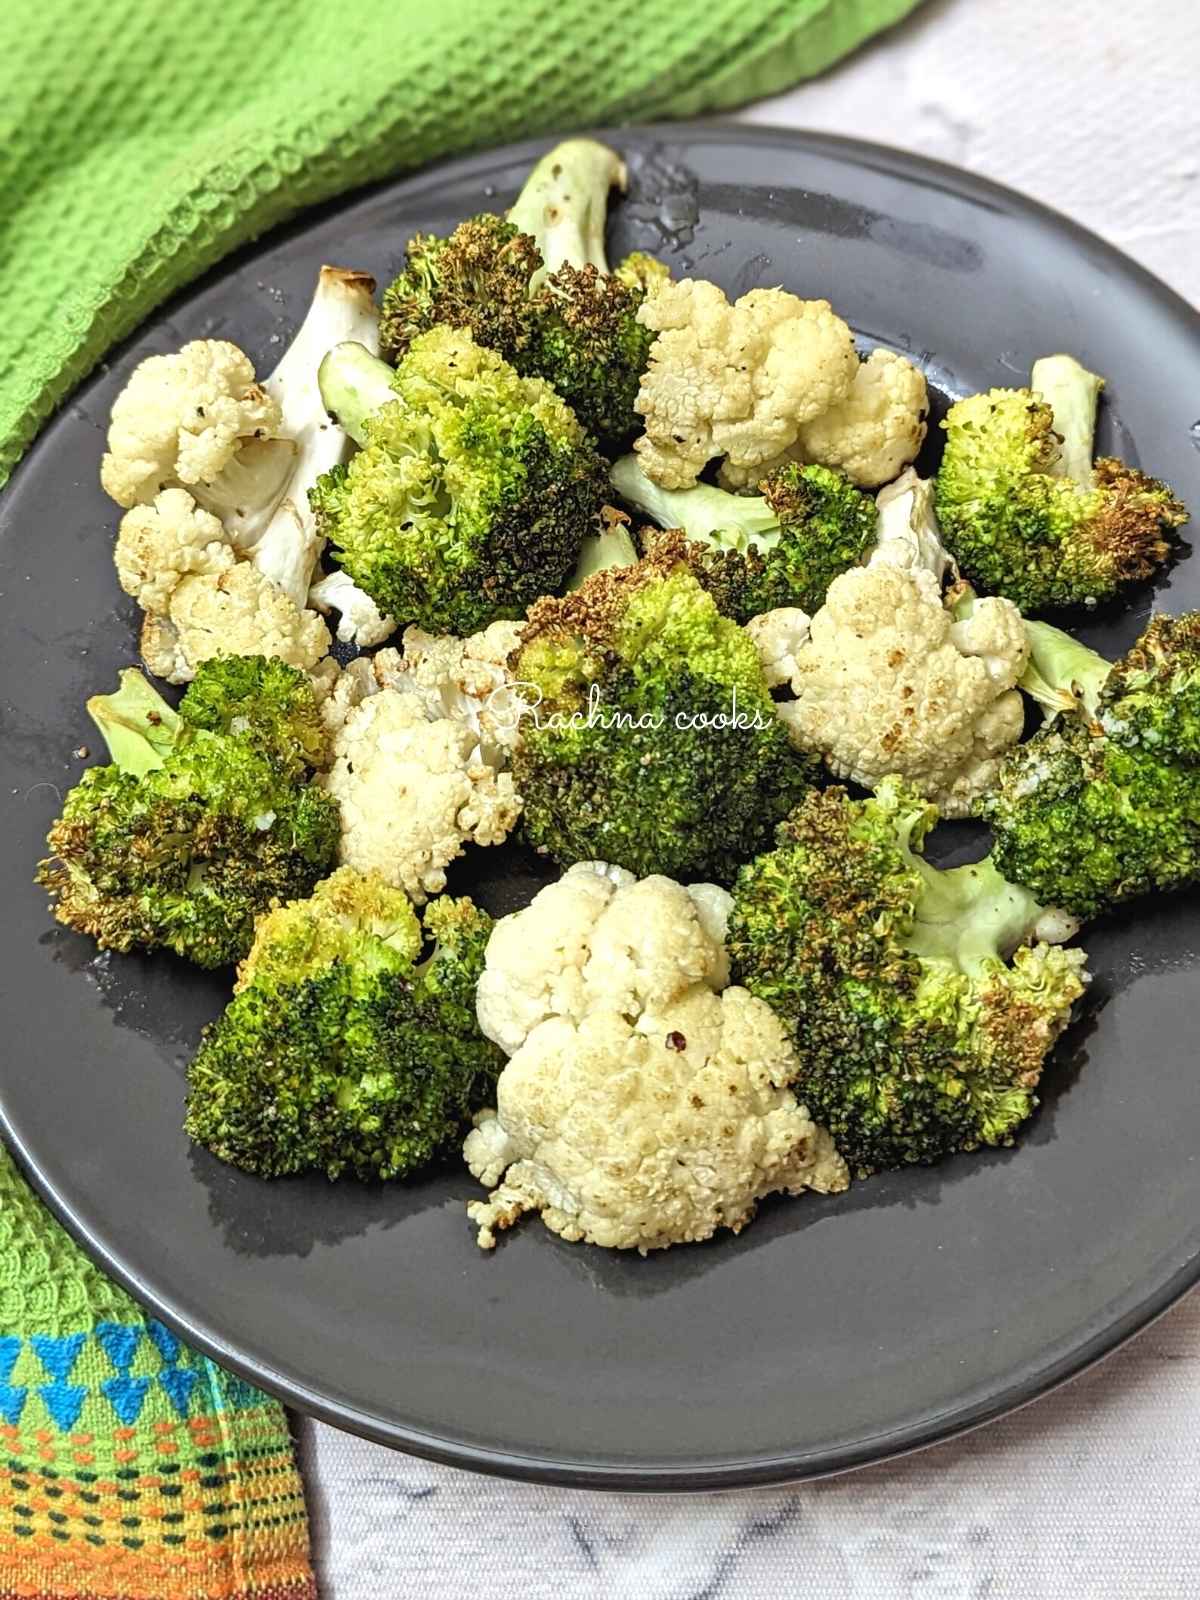 Charred air fried broccoli and cauliflower florets served on a black plate.